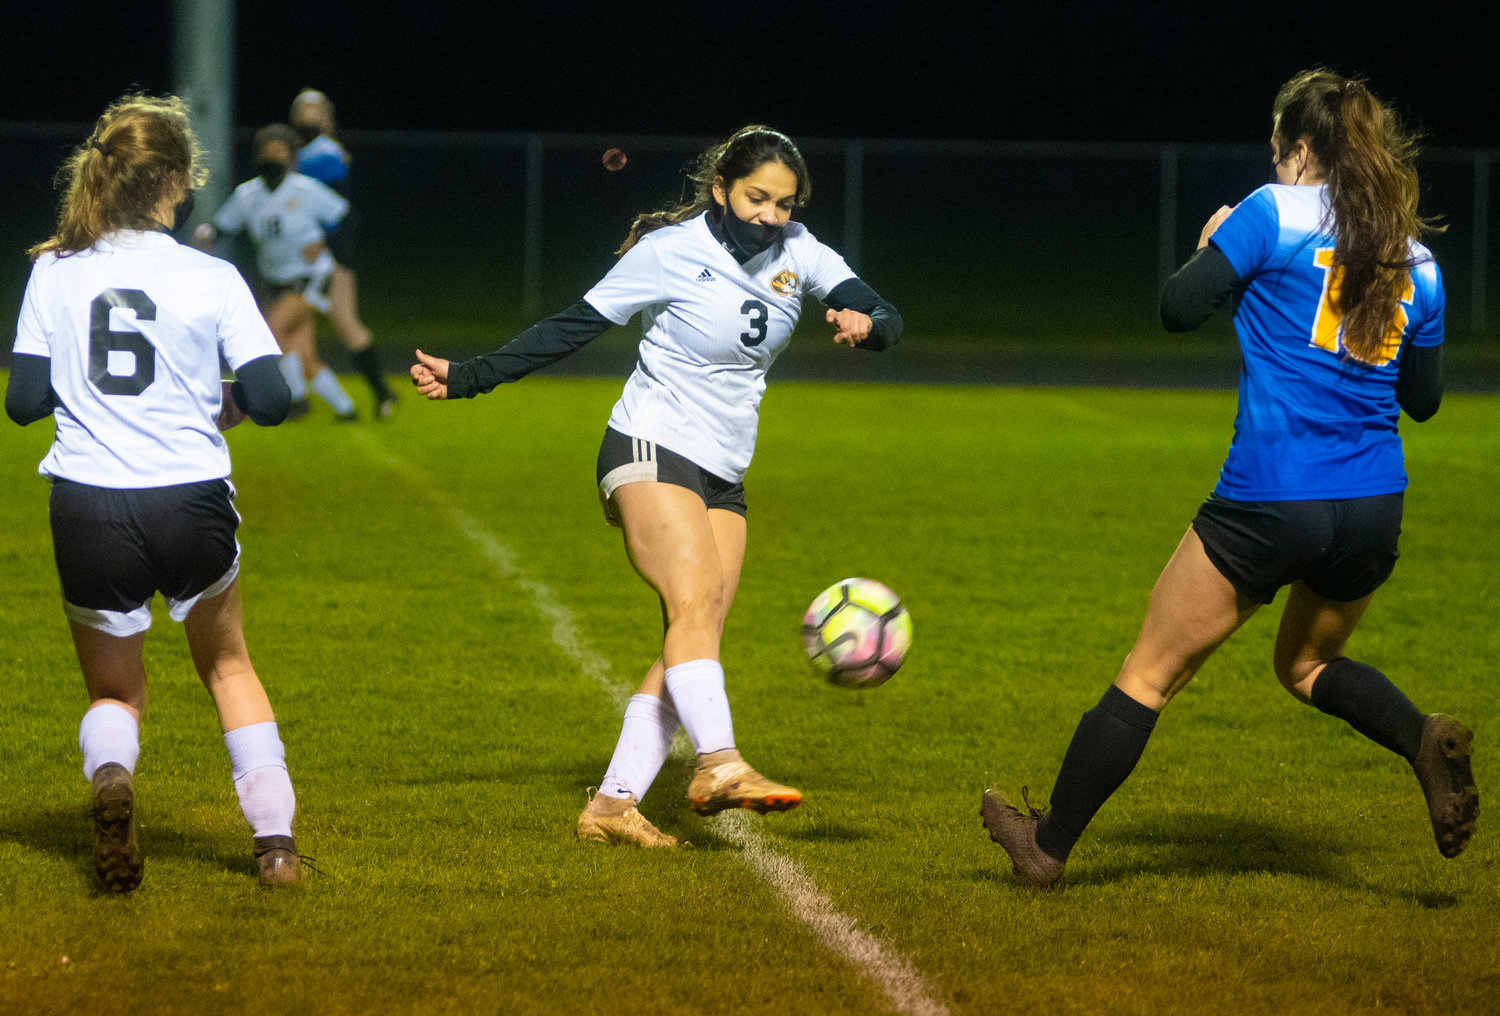 Napavine's Natalya Marcial (3) boots the ball downfield while Adna's Zarine Walker (16) tries to stop the kick.